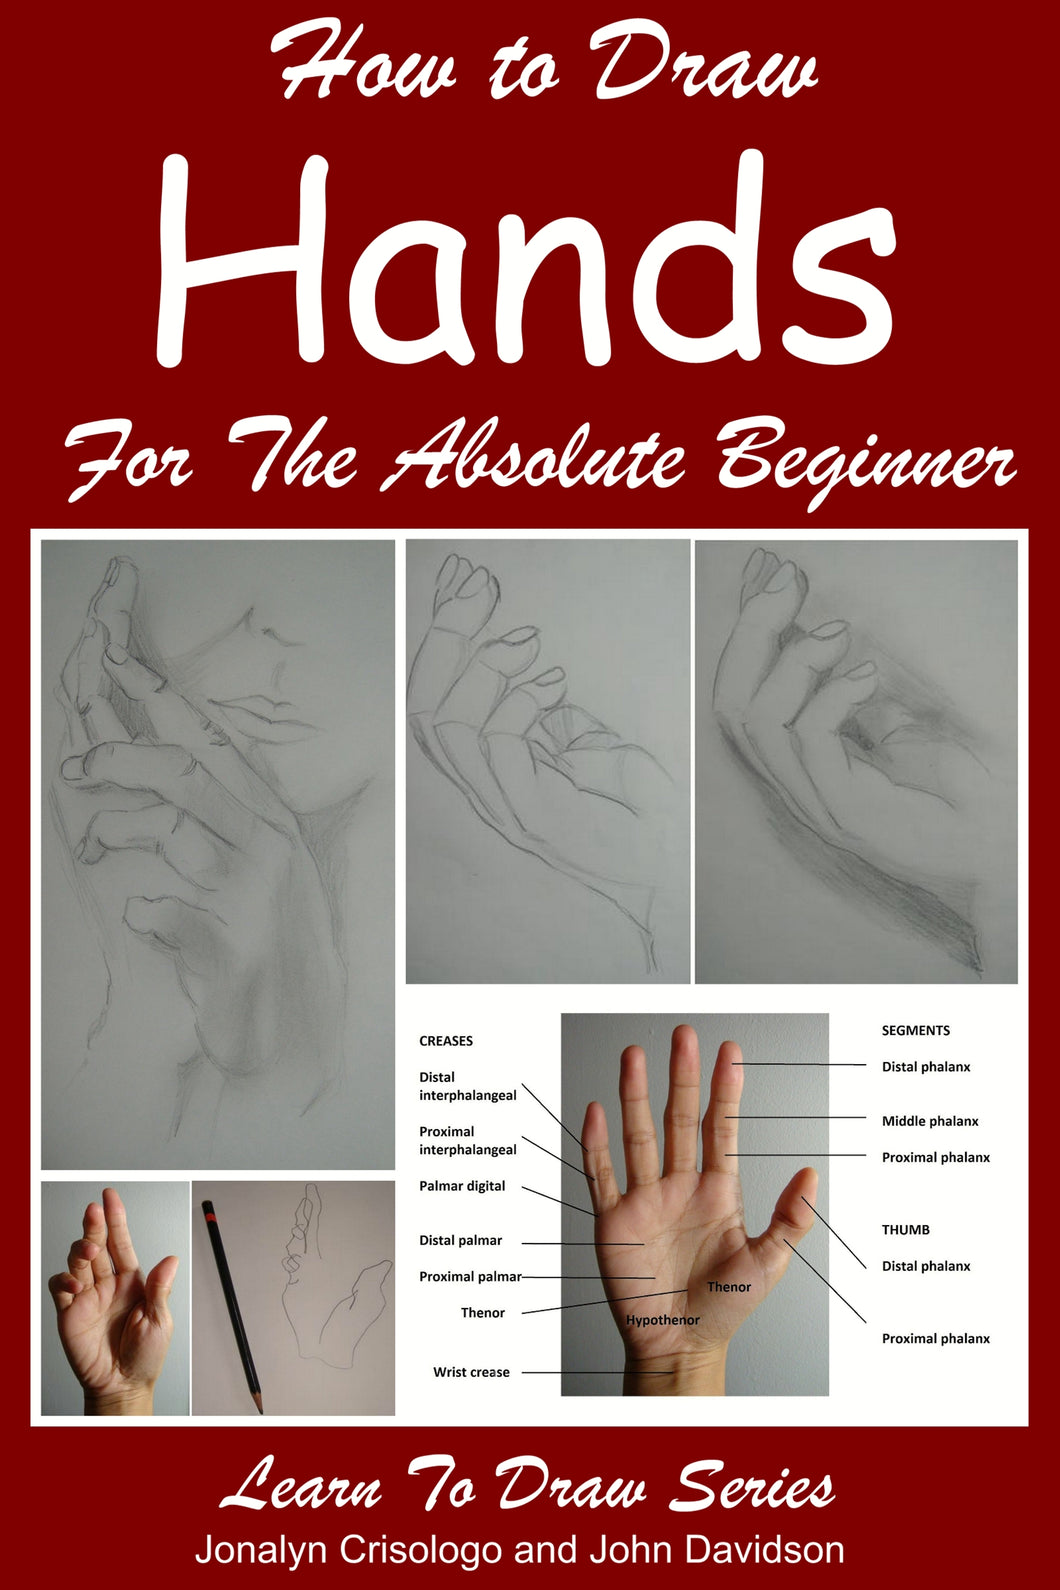 How to Draw Hands for the Absolute Beginner